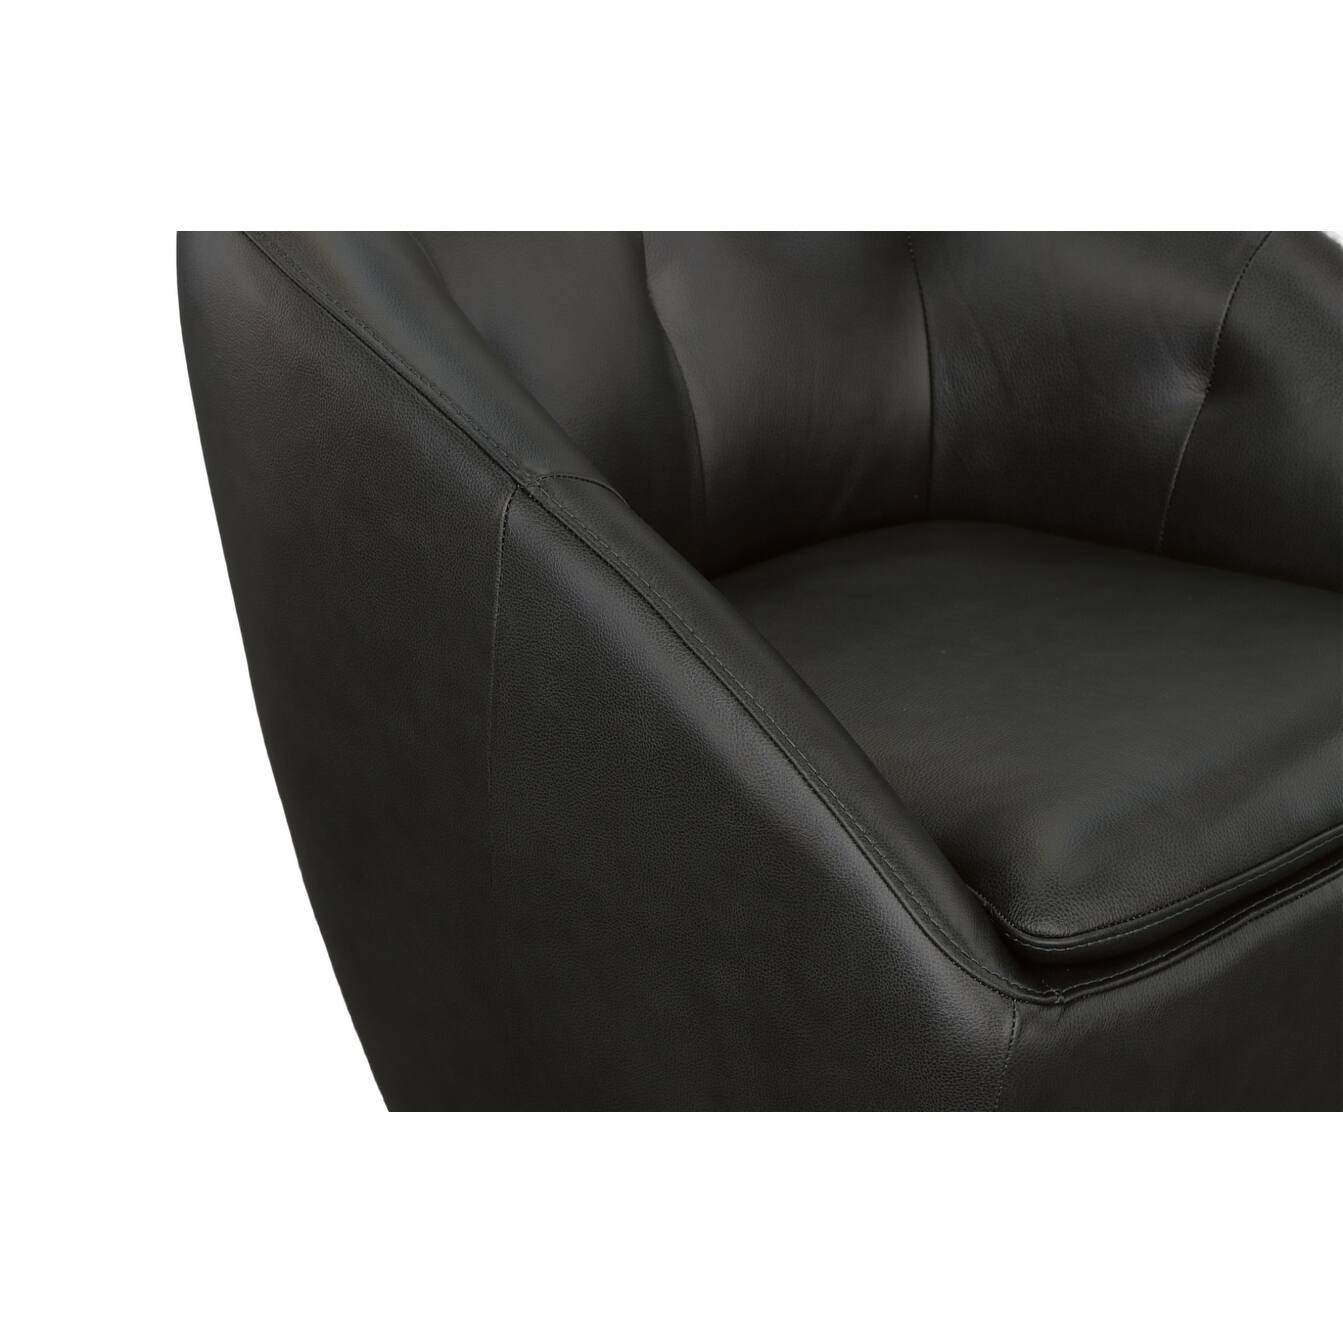 Homestyles Wade Black Leather Swivel Chair - 30" x 30" x 32"